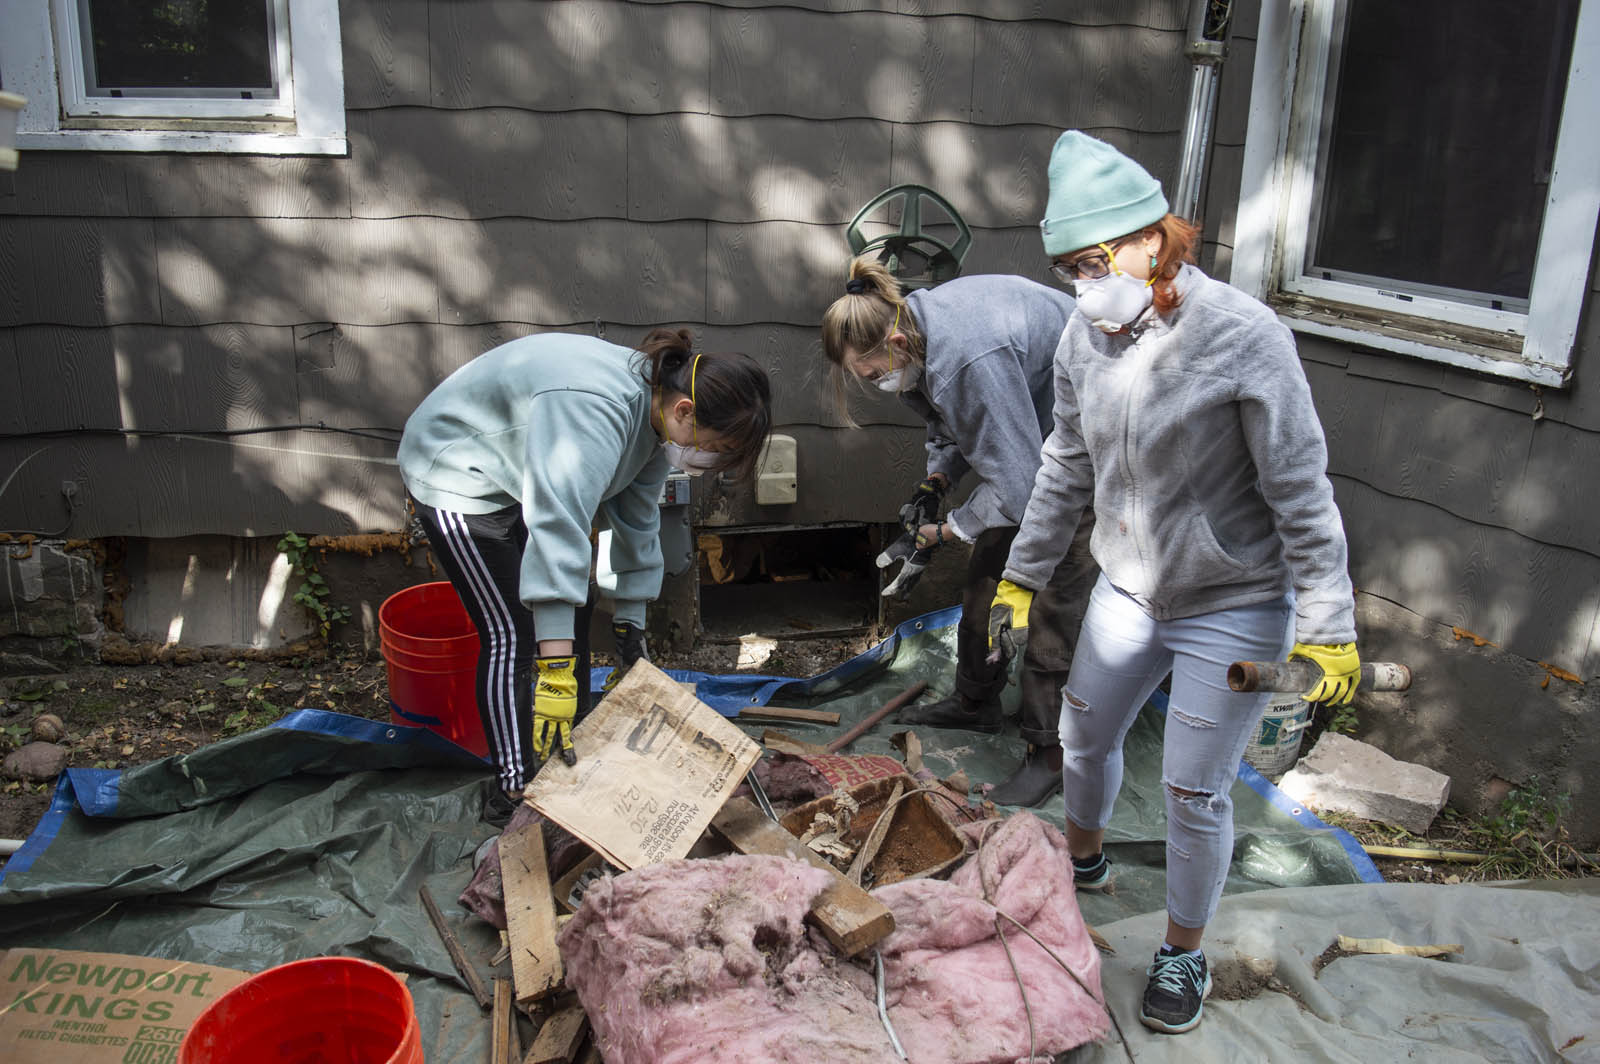 <b>Tiantian Zhu ’22</b>, <b>Frannie Nelson ’21</b>, and <b>Fai Chanchai ’20</b> remove debris from a home’s crawl space before laying new insulation. The three helped retrofit a house in the community as part of their coursework in a CC class titled Energy: Environmental Thermodynamics and Energetics. Photo by James O’Brien/ERC